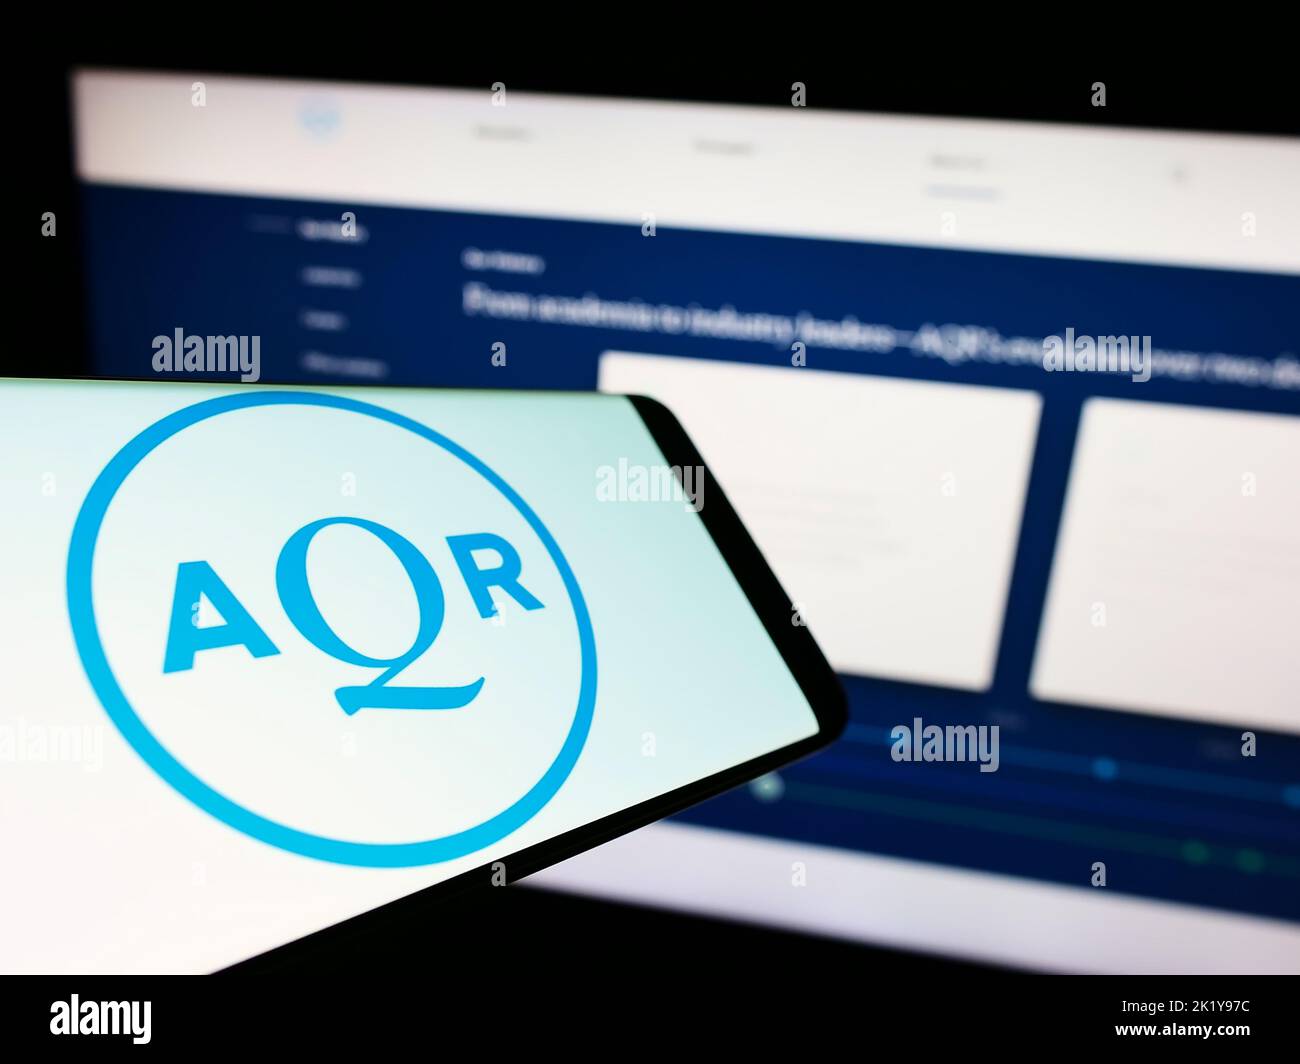 Smartphone with logo of American investment company AQR Capital Management on screen in front of website. Focus on center of phone display. Stock Photo